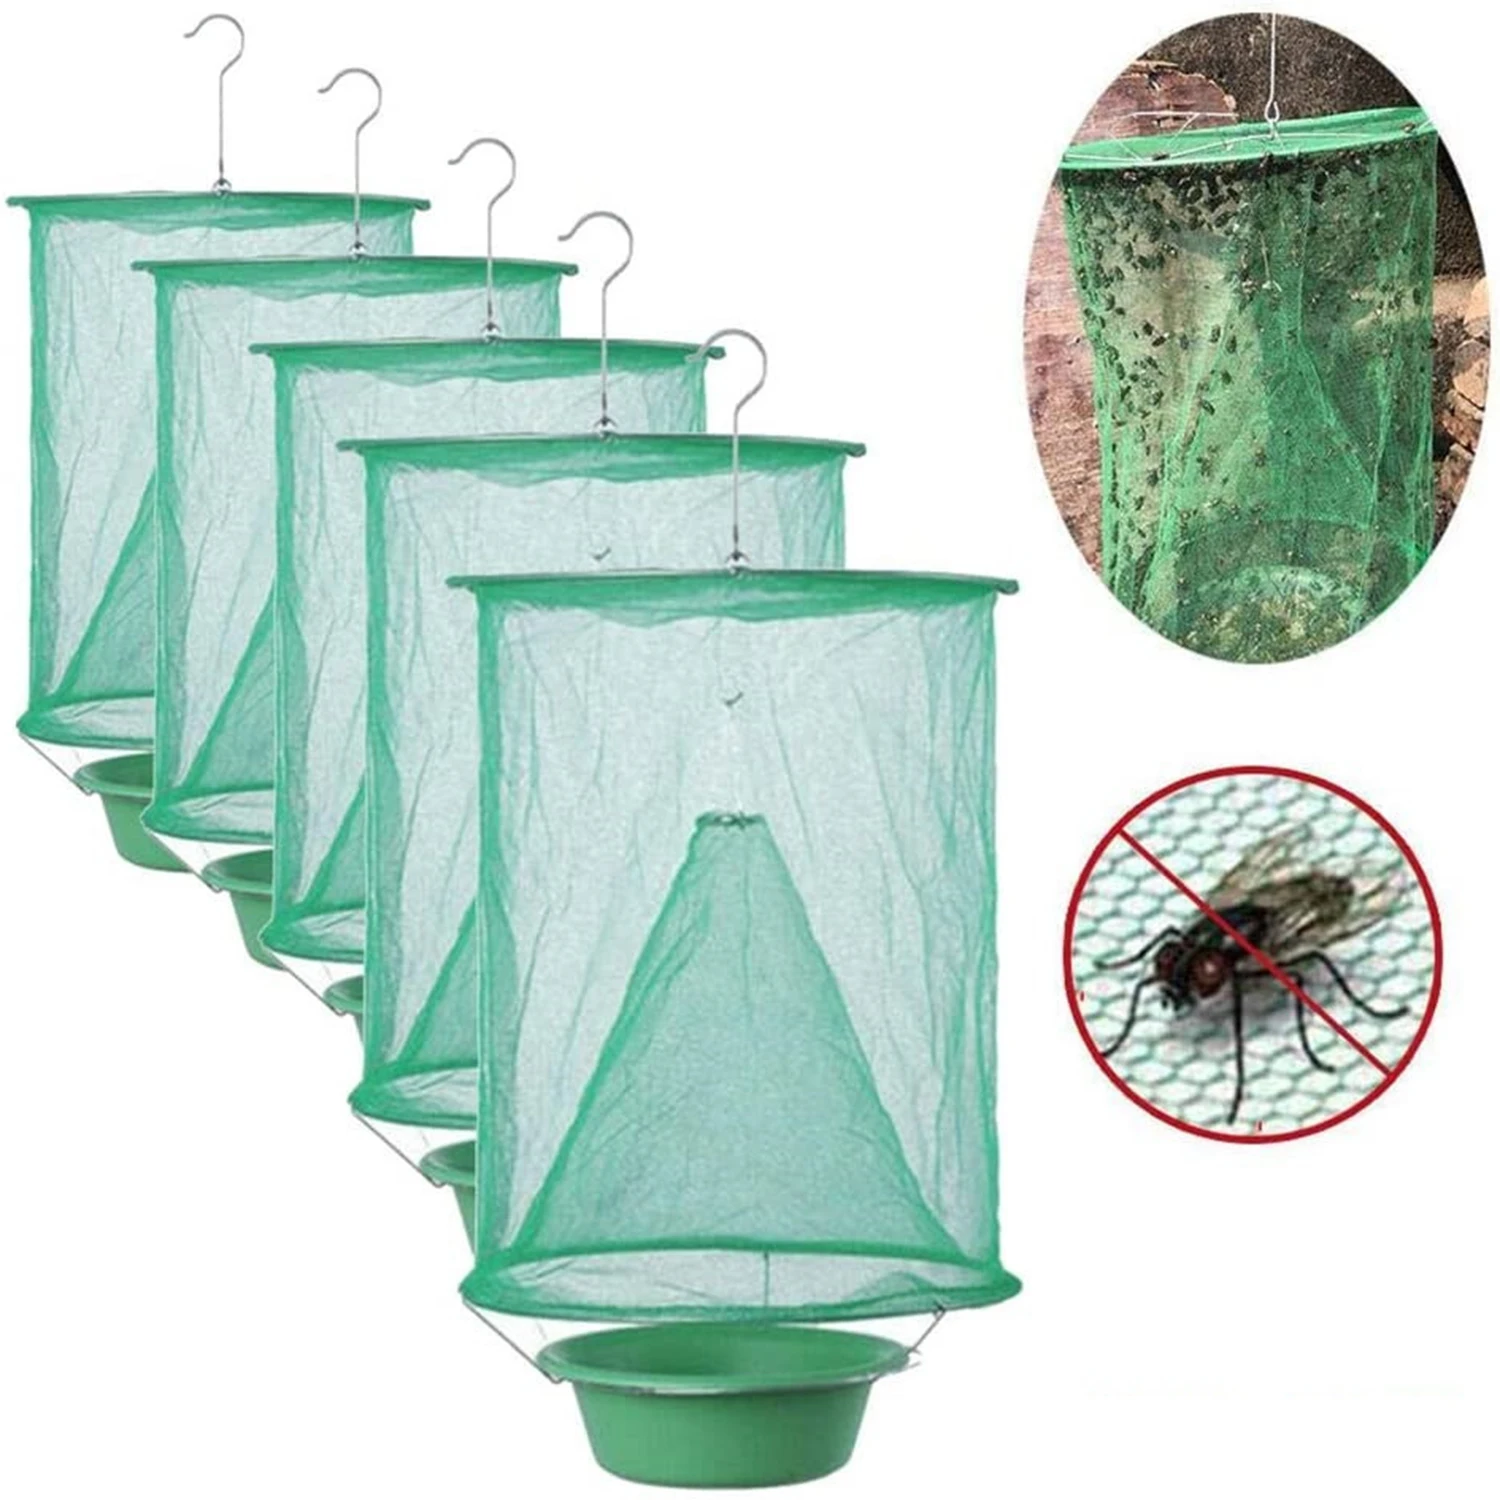 Reusable Hanging Fly Cage Green Fly Catcher Killer Cage Net Practical Pest Catch For Indoor Or Outdoor Family Farms Restaurants